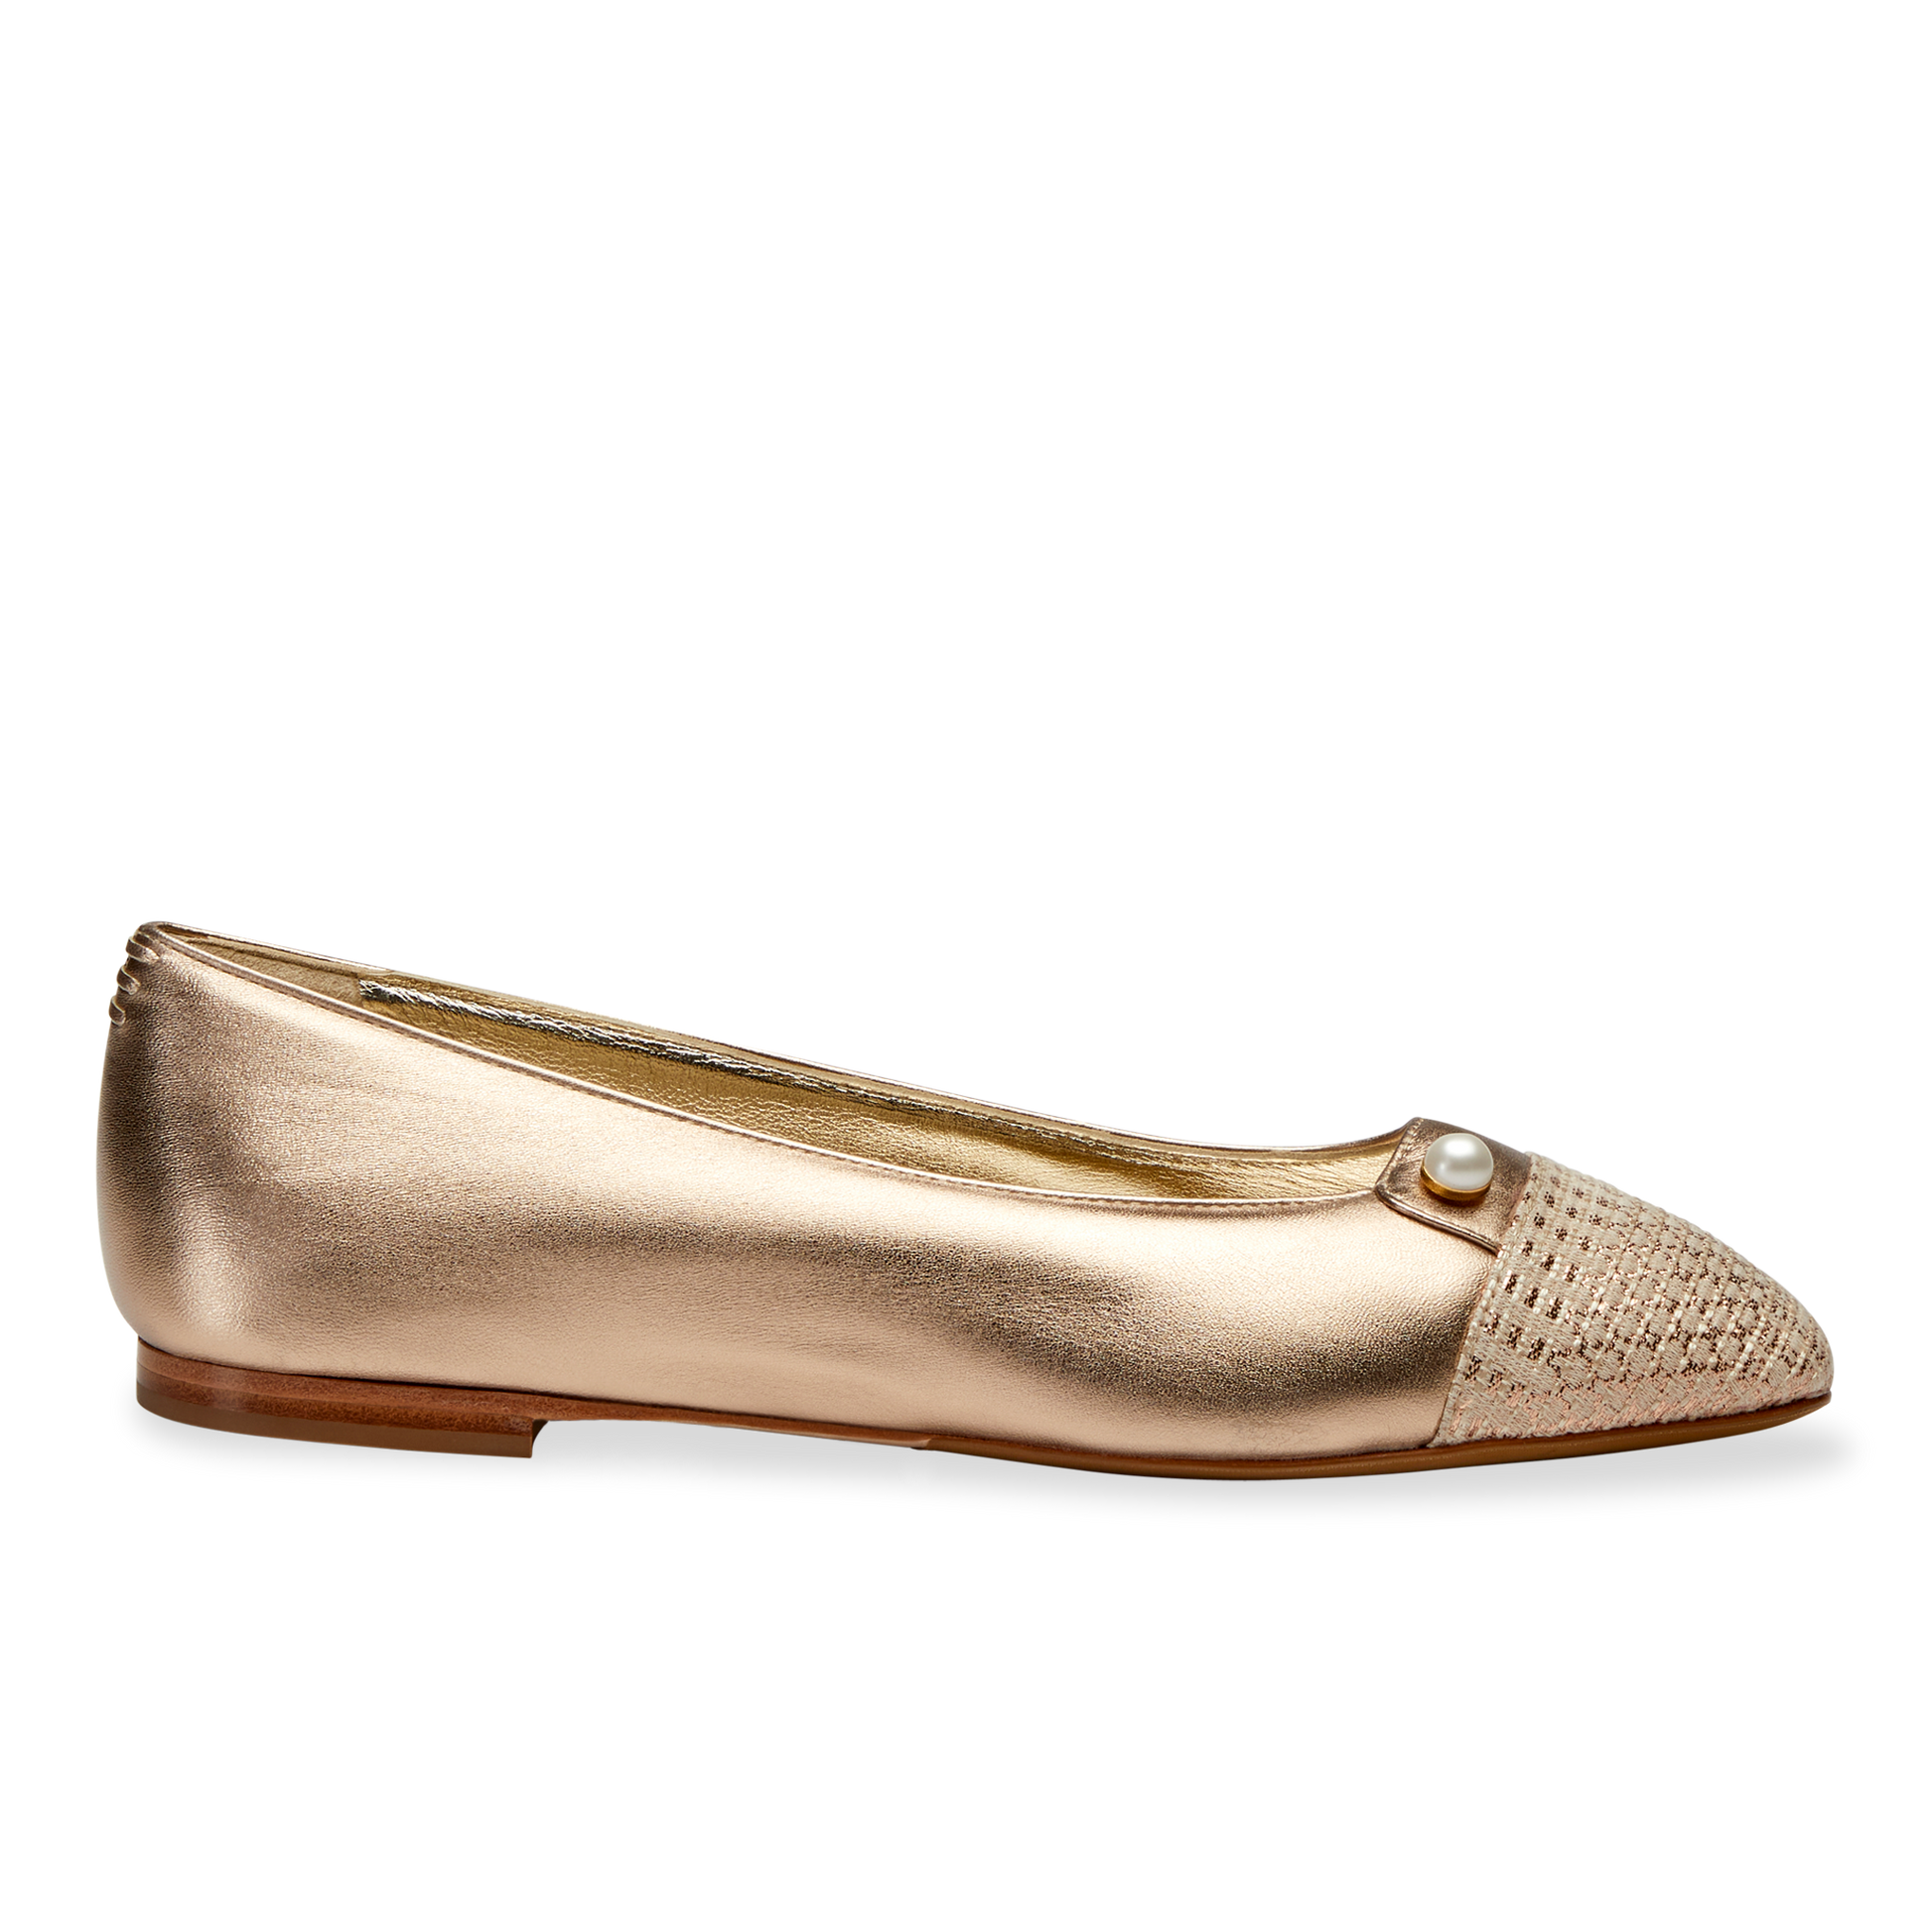 A soft and flexible version of the classic ballet flat, in rose gold nappa with a shimmer textile cap toe.